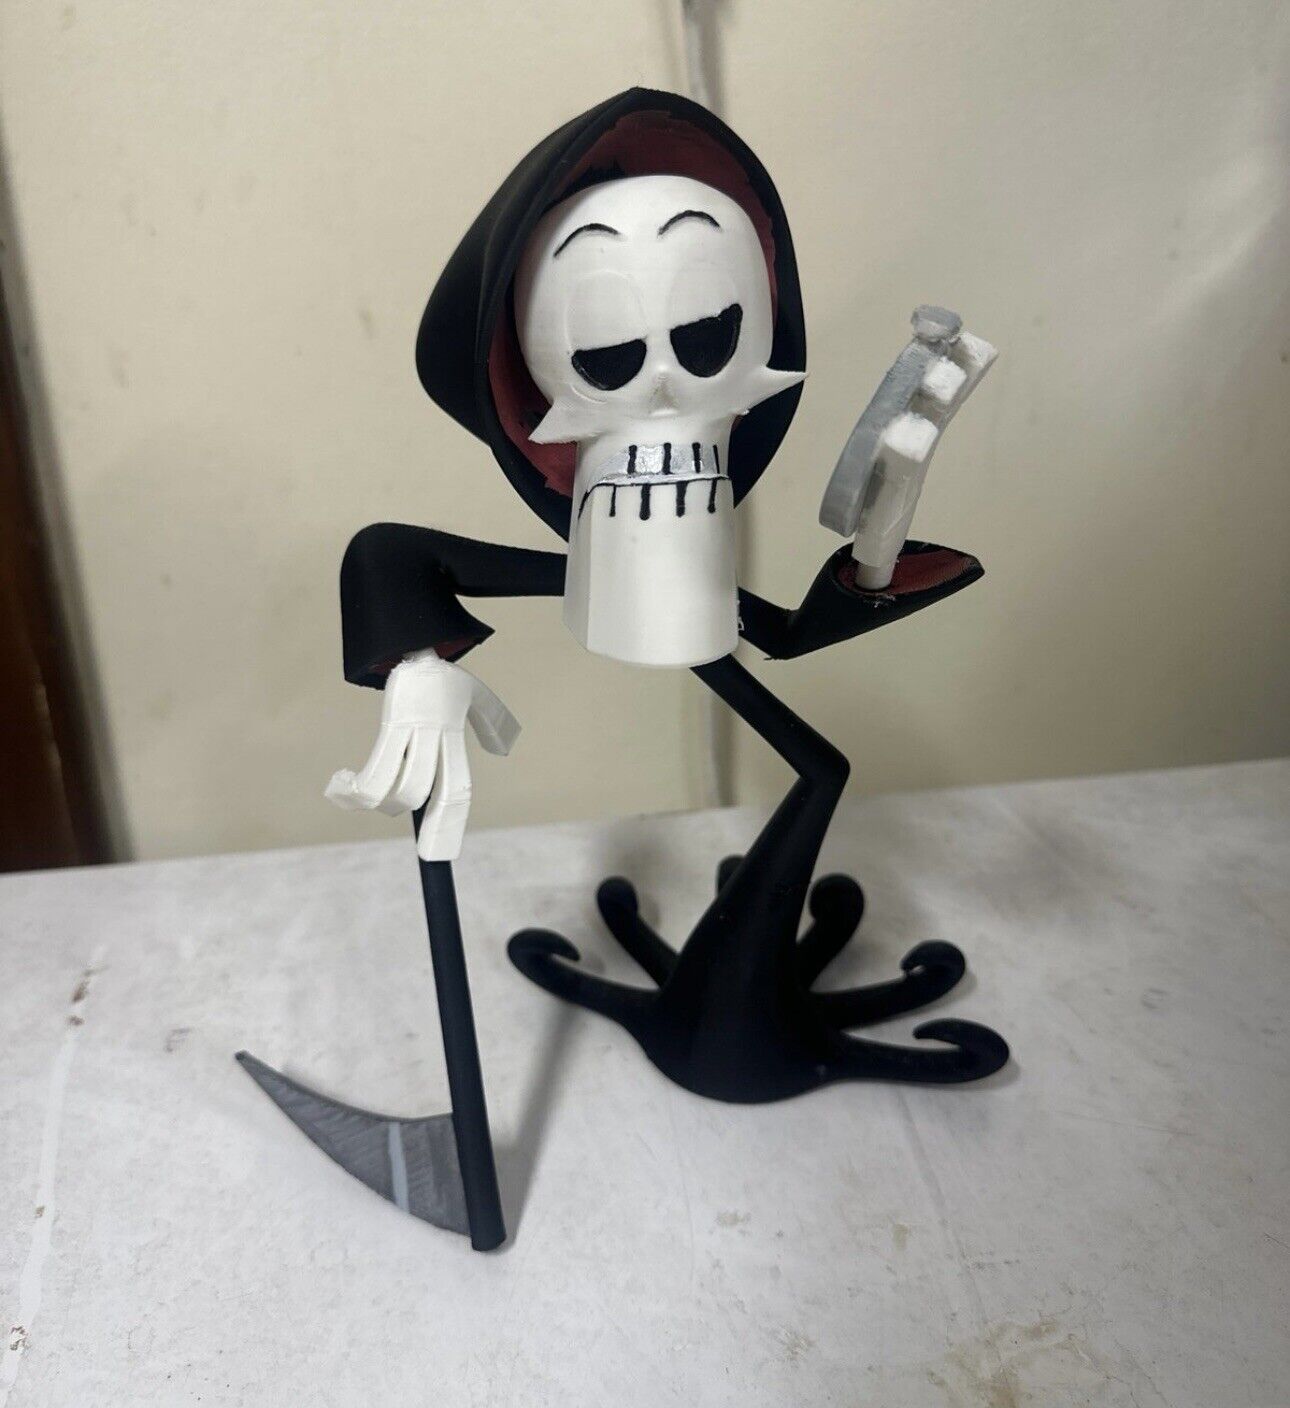 The Grim Adventures of Billy & Mandy Figure 9” Tall